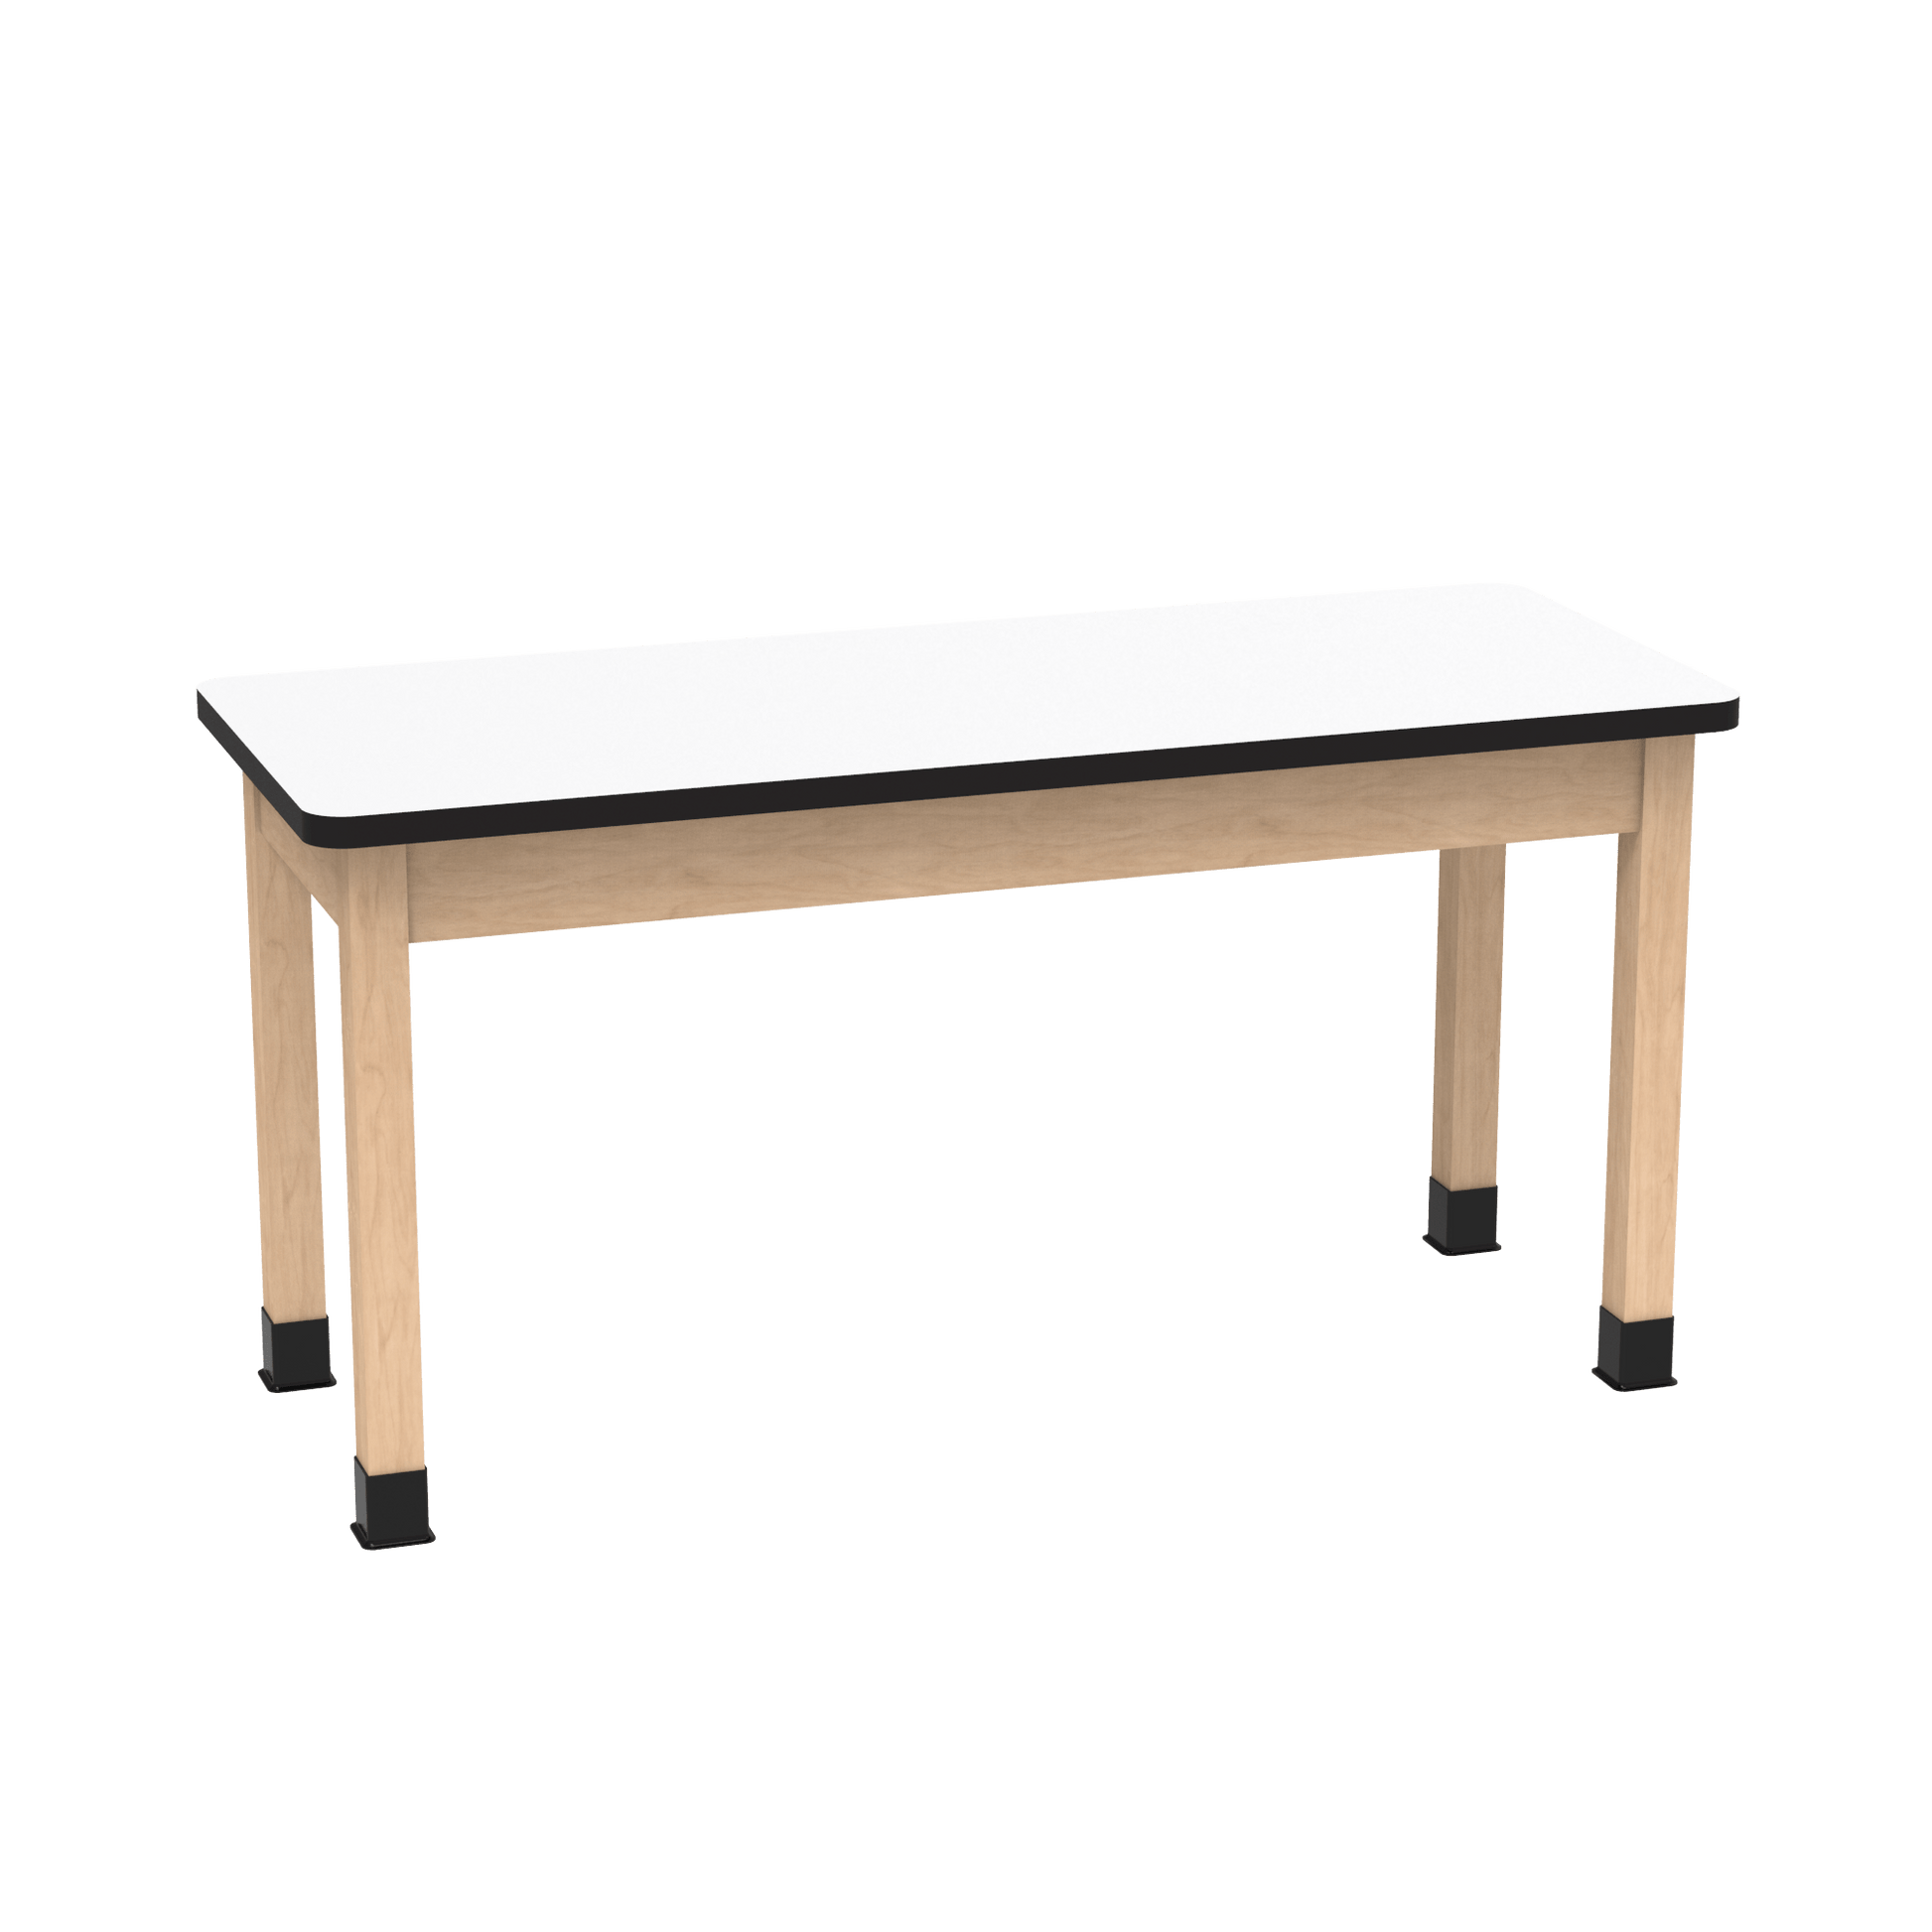 Diversified Woodcrafts Science Table - Plain Apron - 48" W x 42" D - Solid Wood Frame and Adjustable Glides - SchoolOutlet